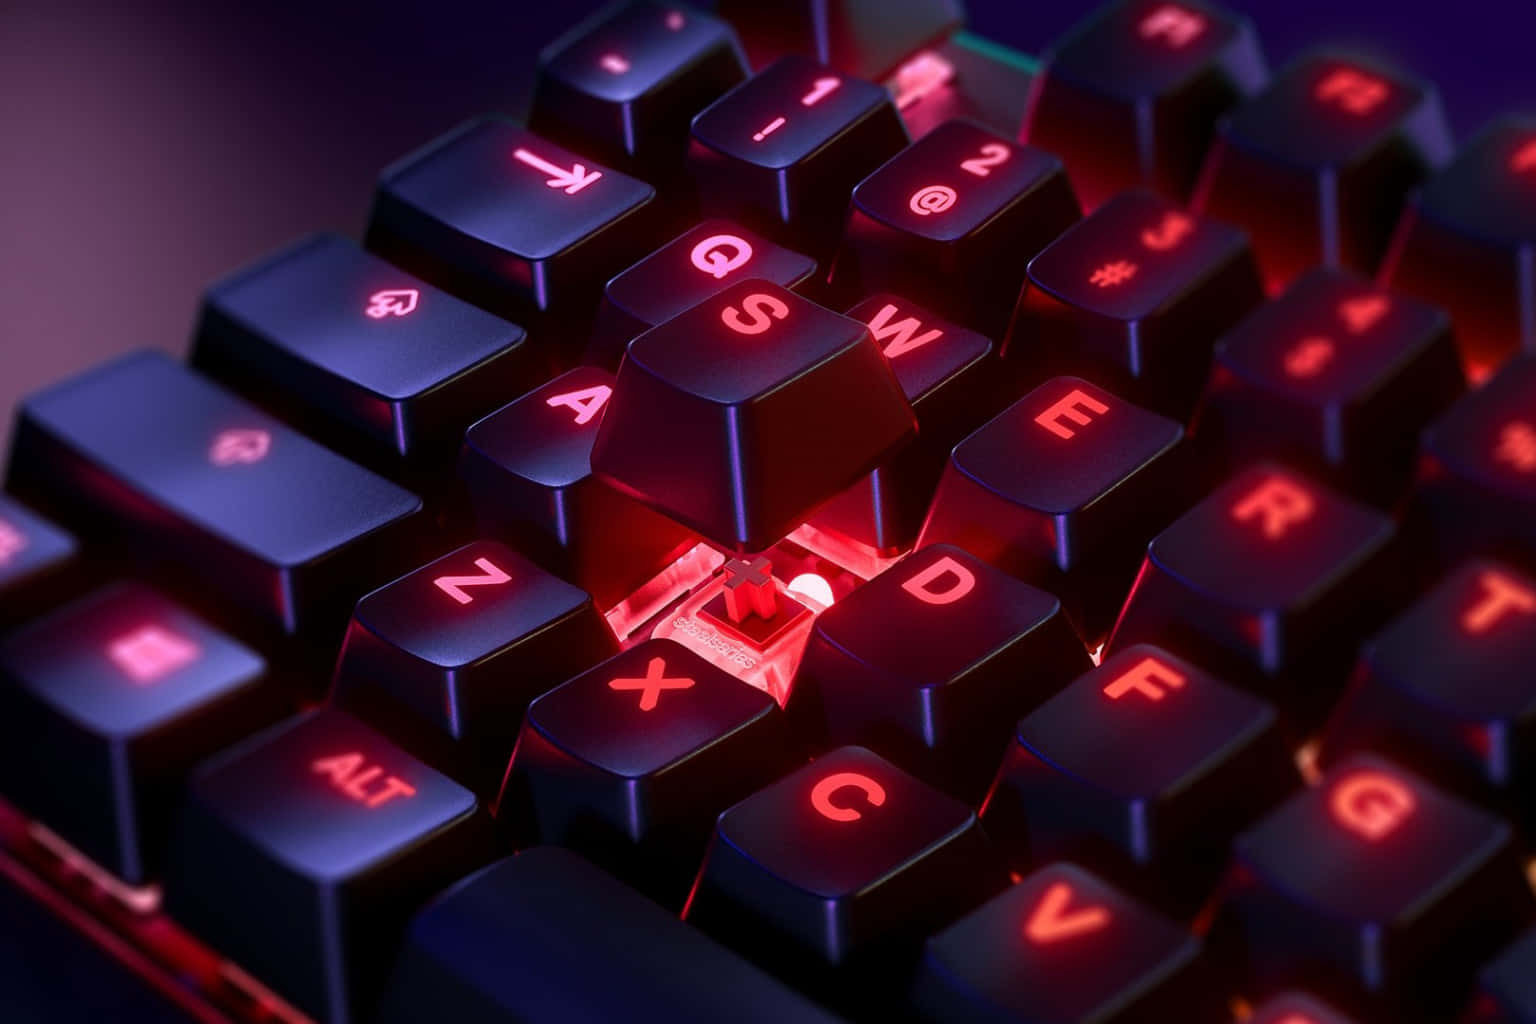 Get Your Game On With A Custom Gaming Keyboard Wallpaper